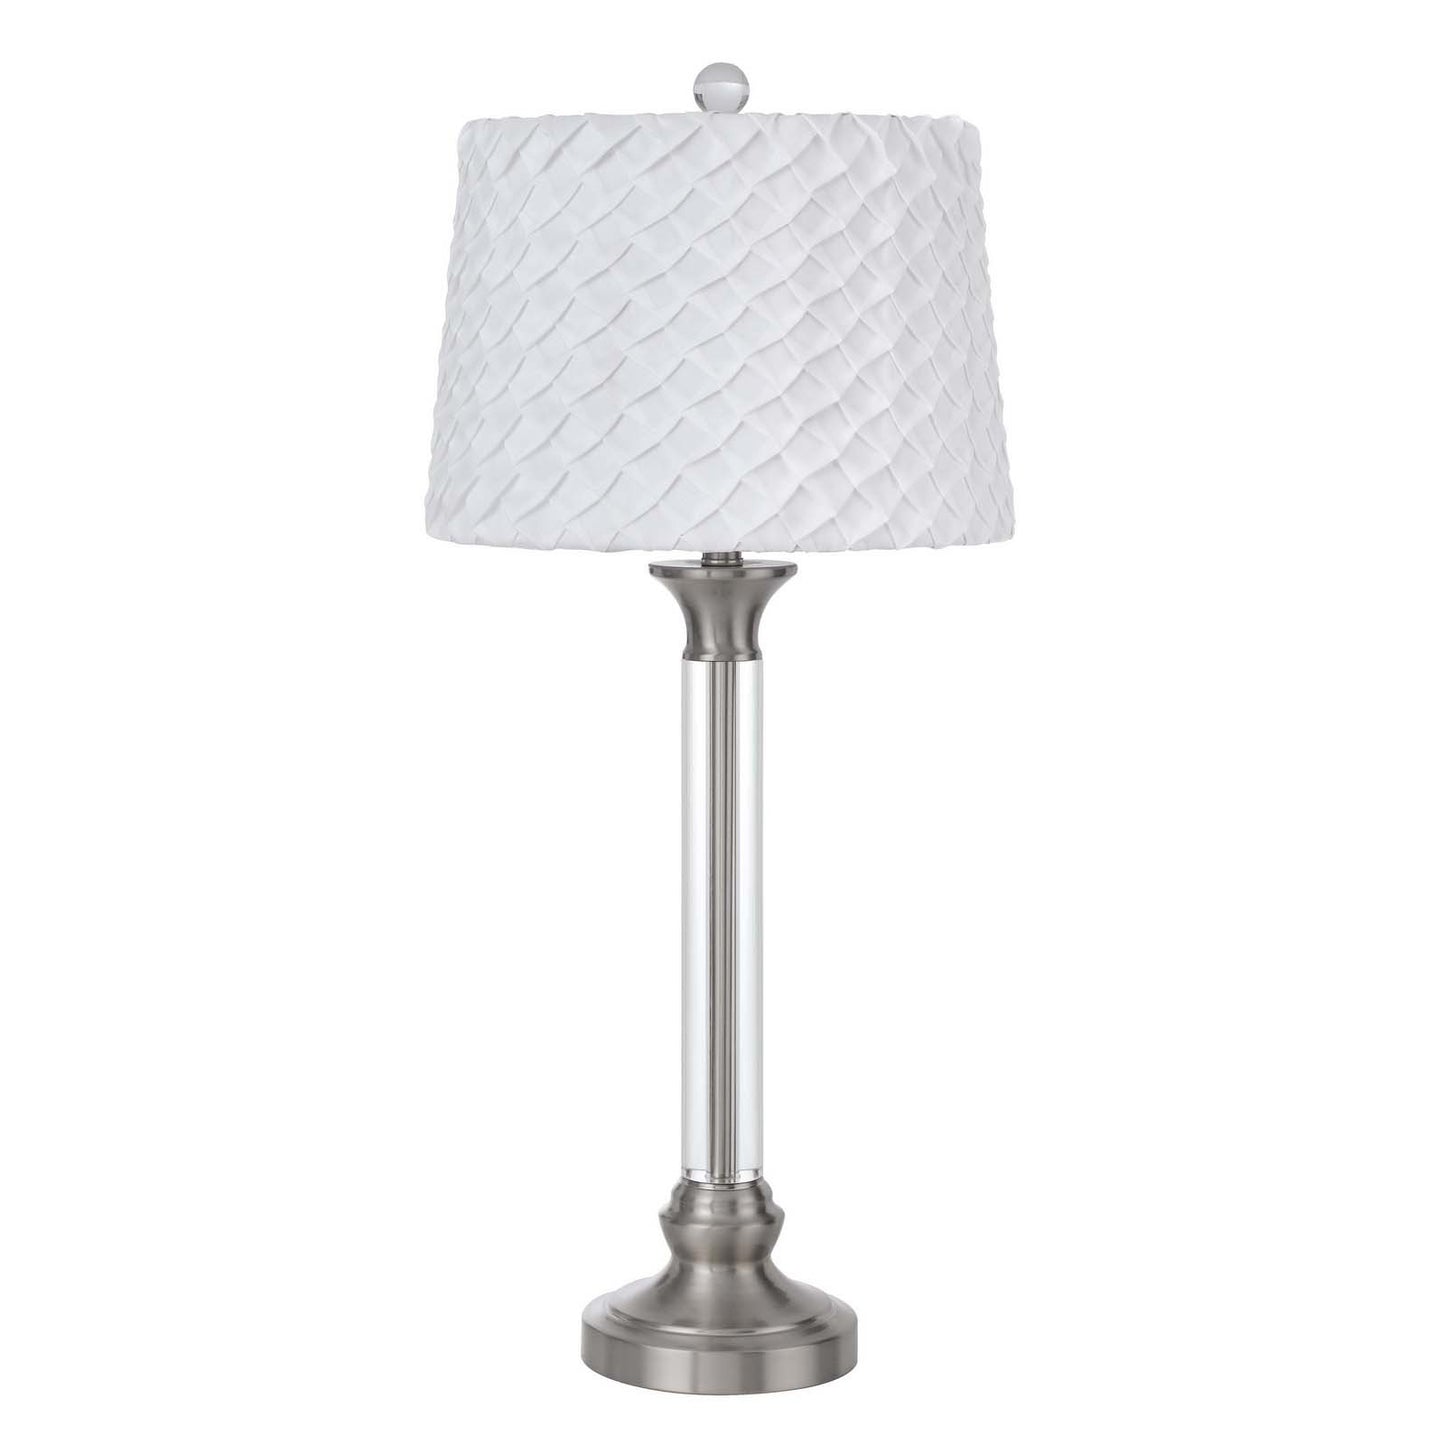 32" Nickel Metal Table Lamp With White Empire Shade